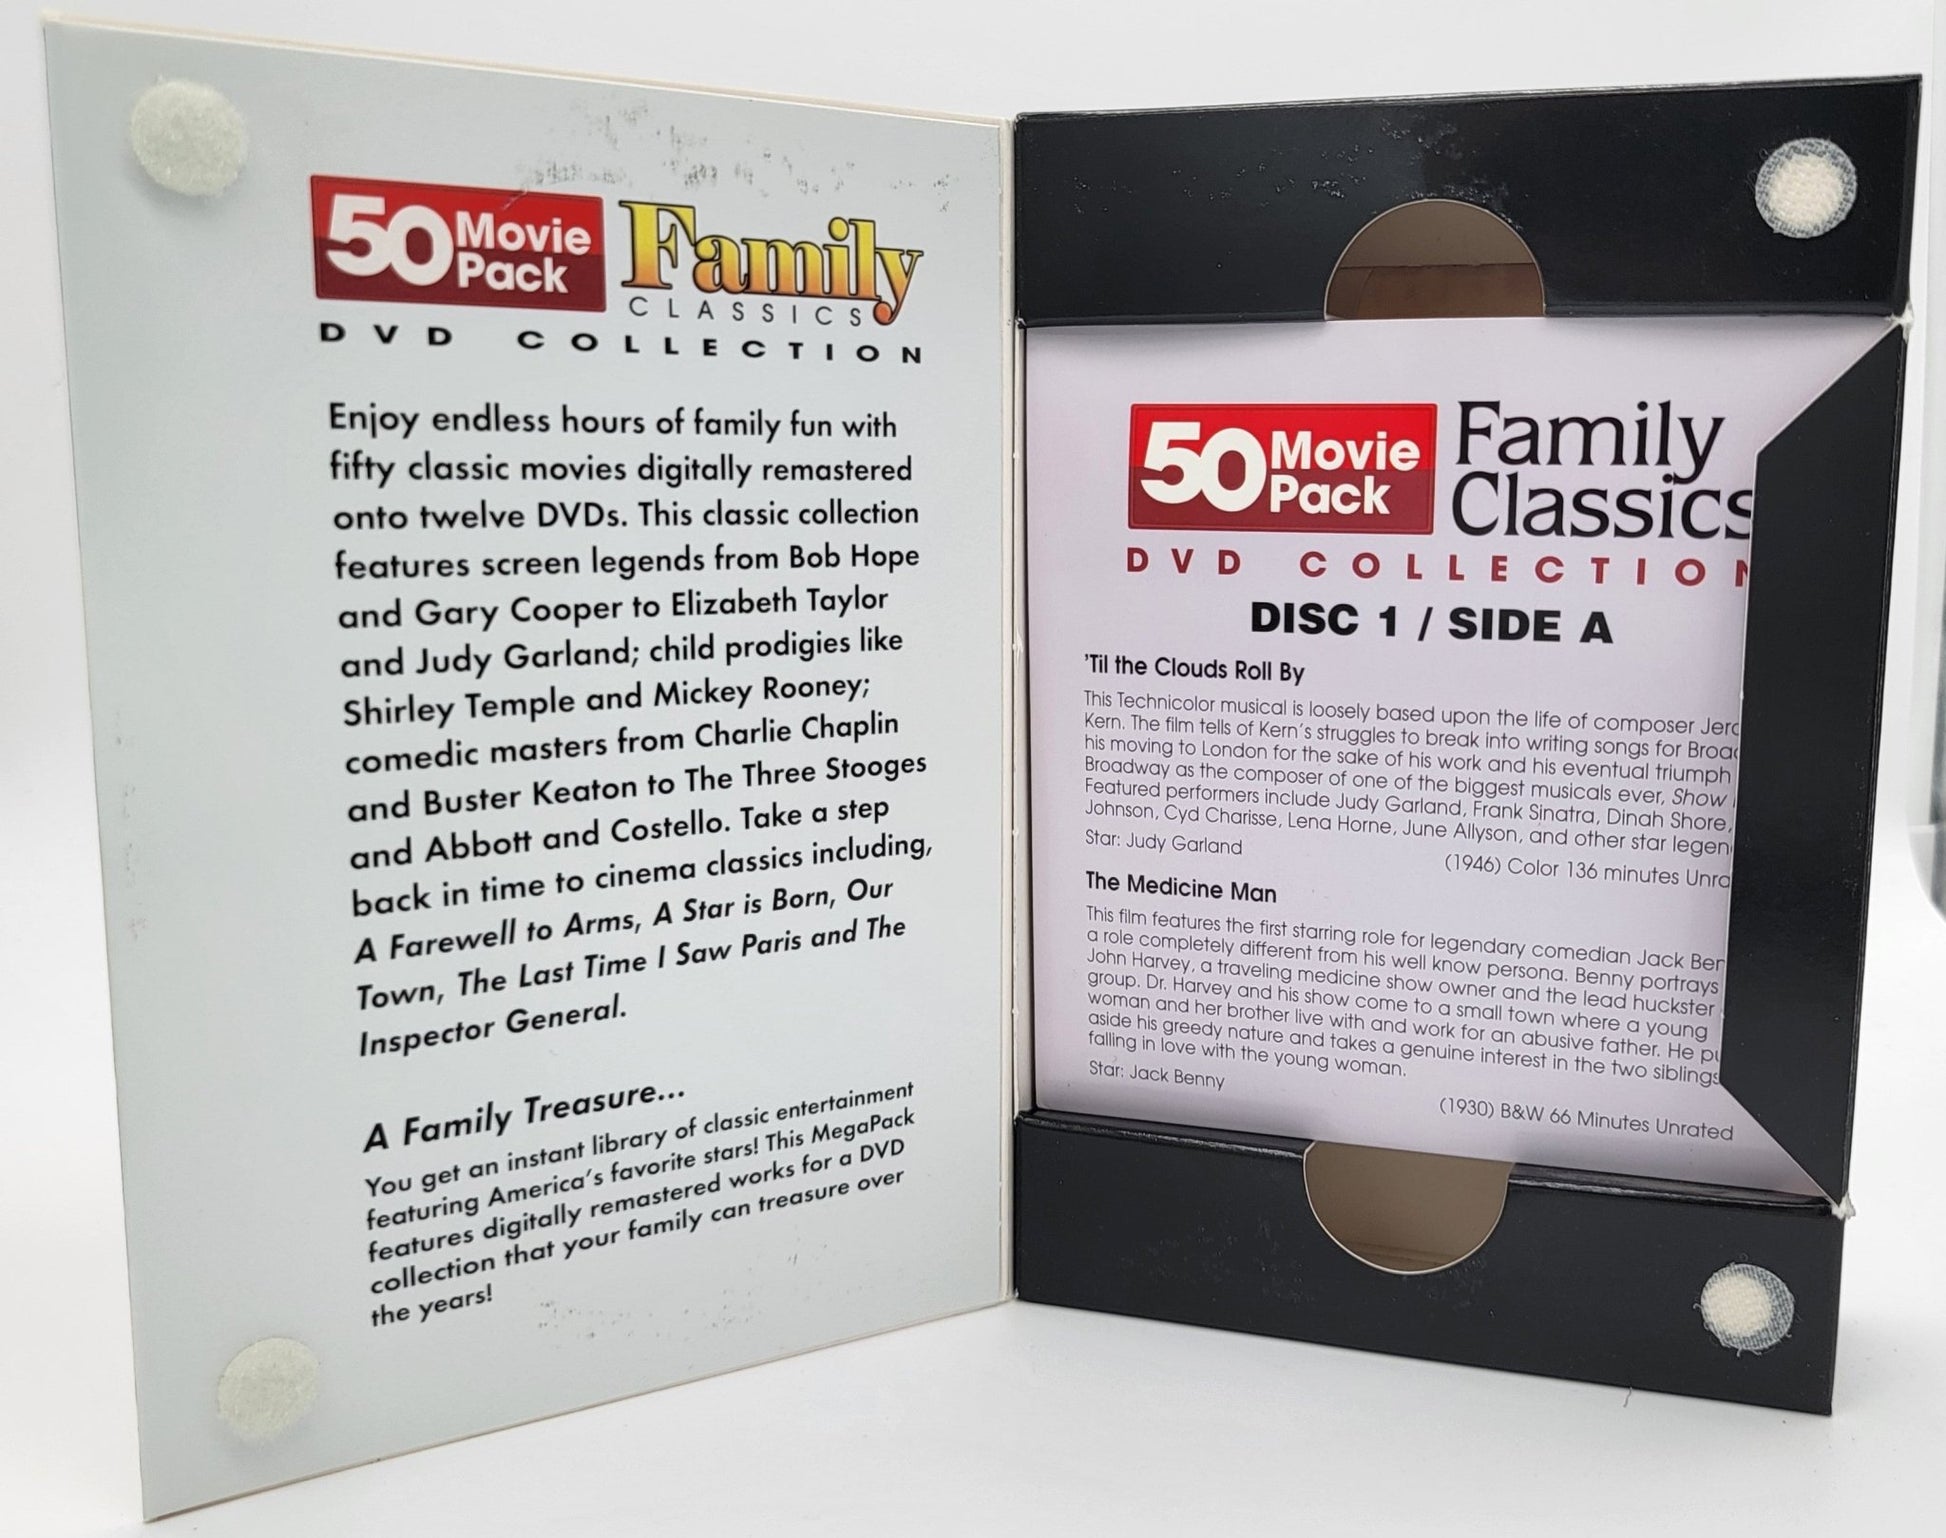 Mill Creek Entertainment - Family Classics | DVD | 50 Movie Pack 12 Double Sided DVDs Dics - dvd - Steady Bunny Shop